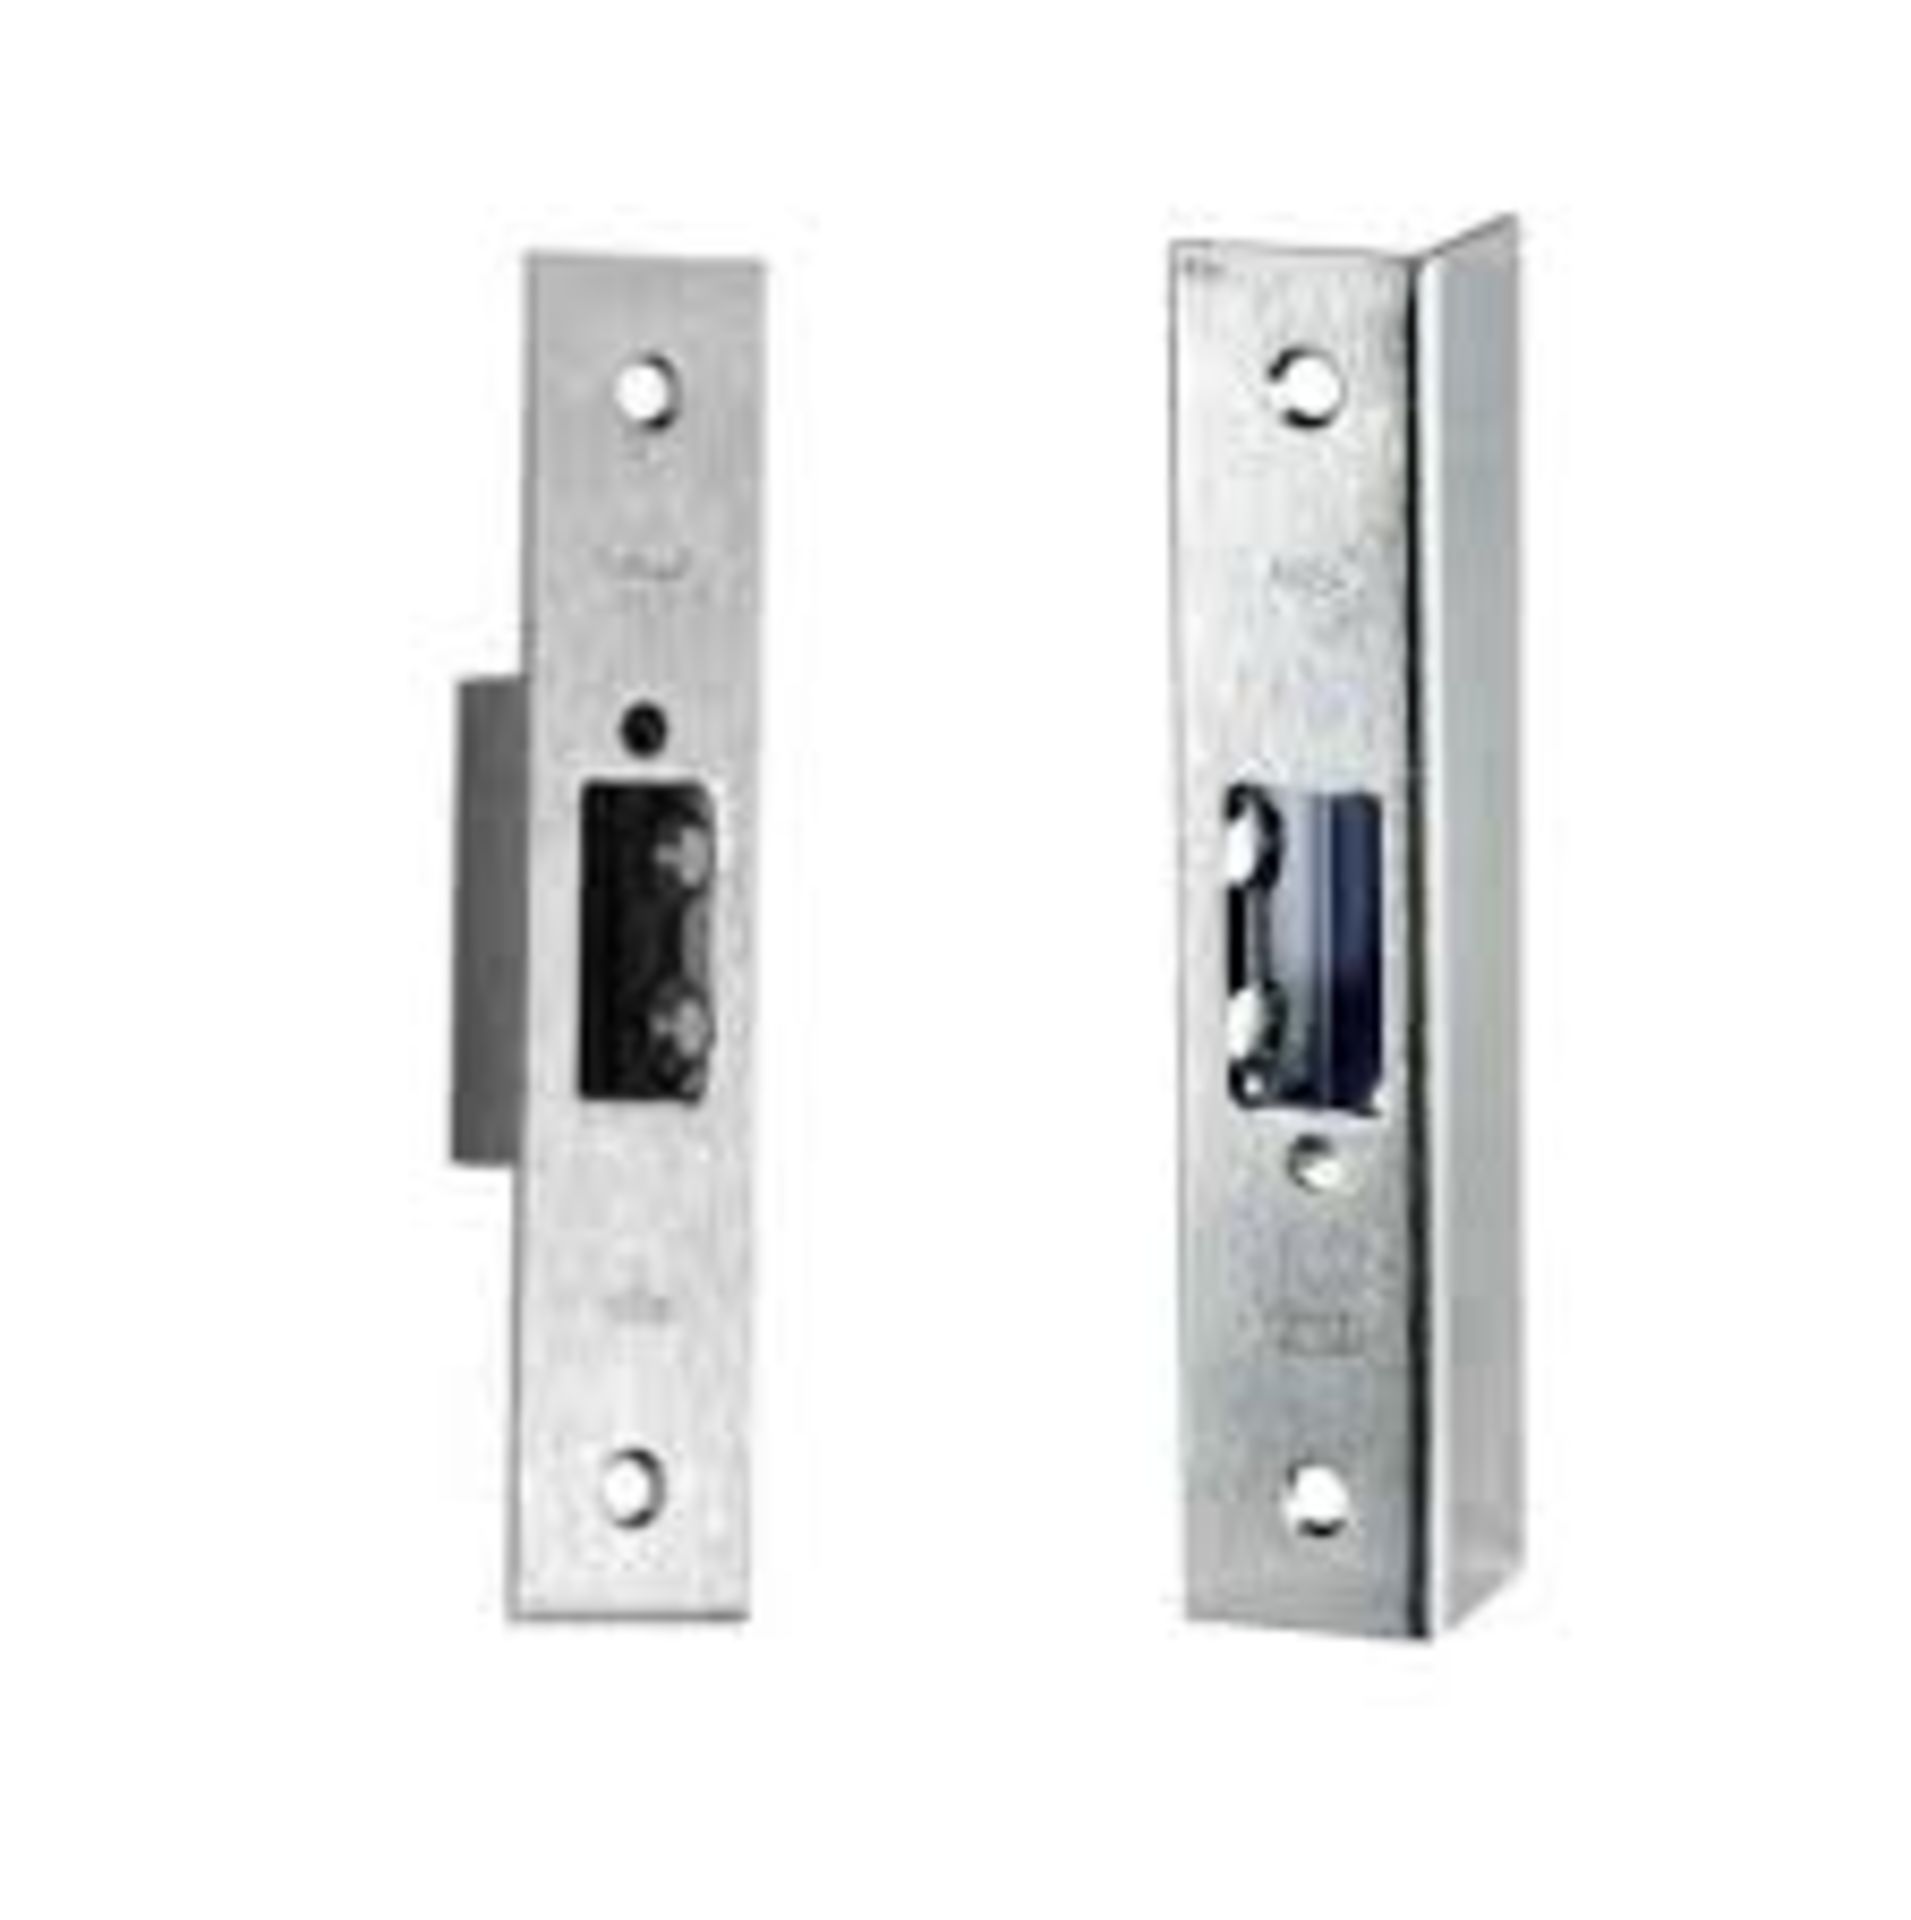 30 x Assa Abloy Striking Plate - New Boxed Stock -Product Code:1888-1 - Location: Peterlee, SR8 -